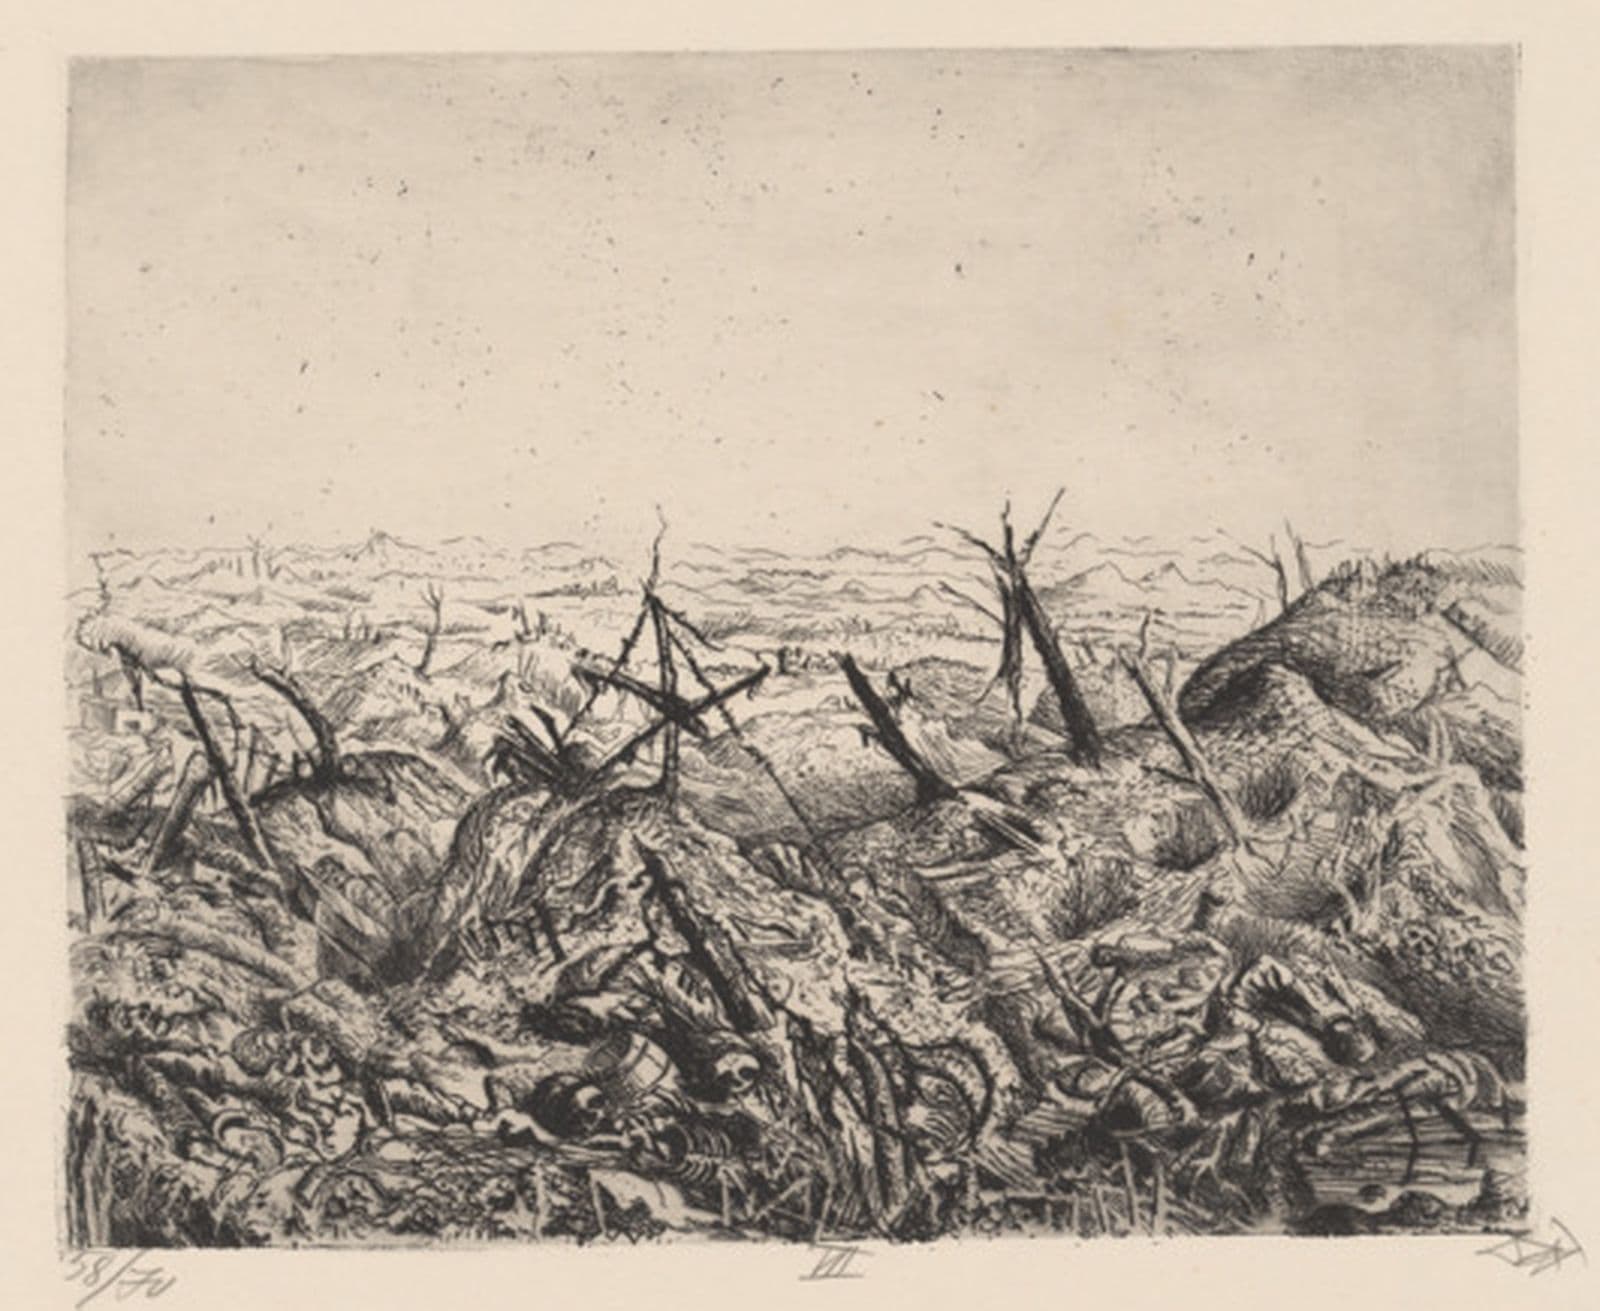 A drawing of a shipwreck